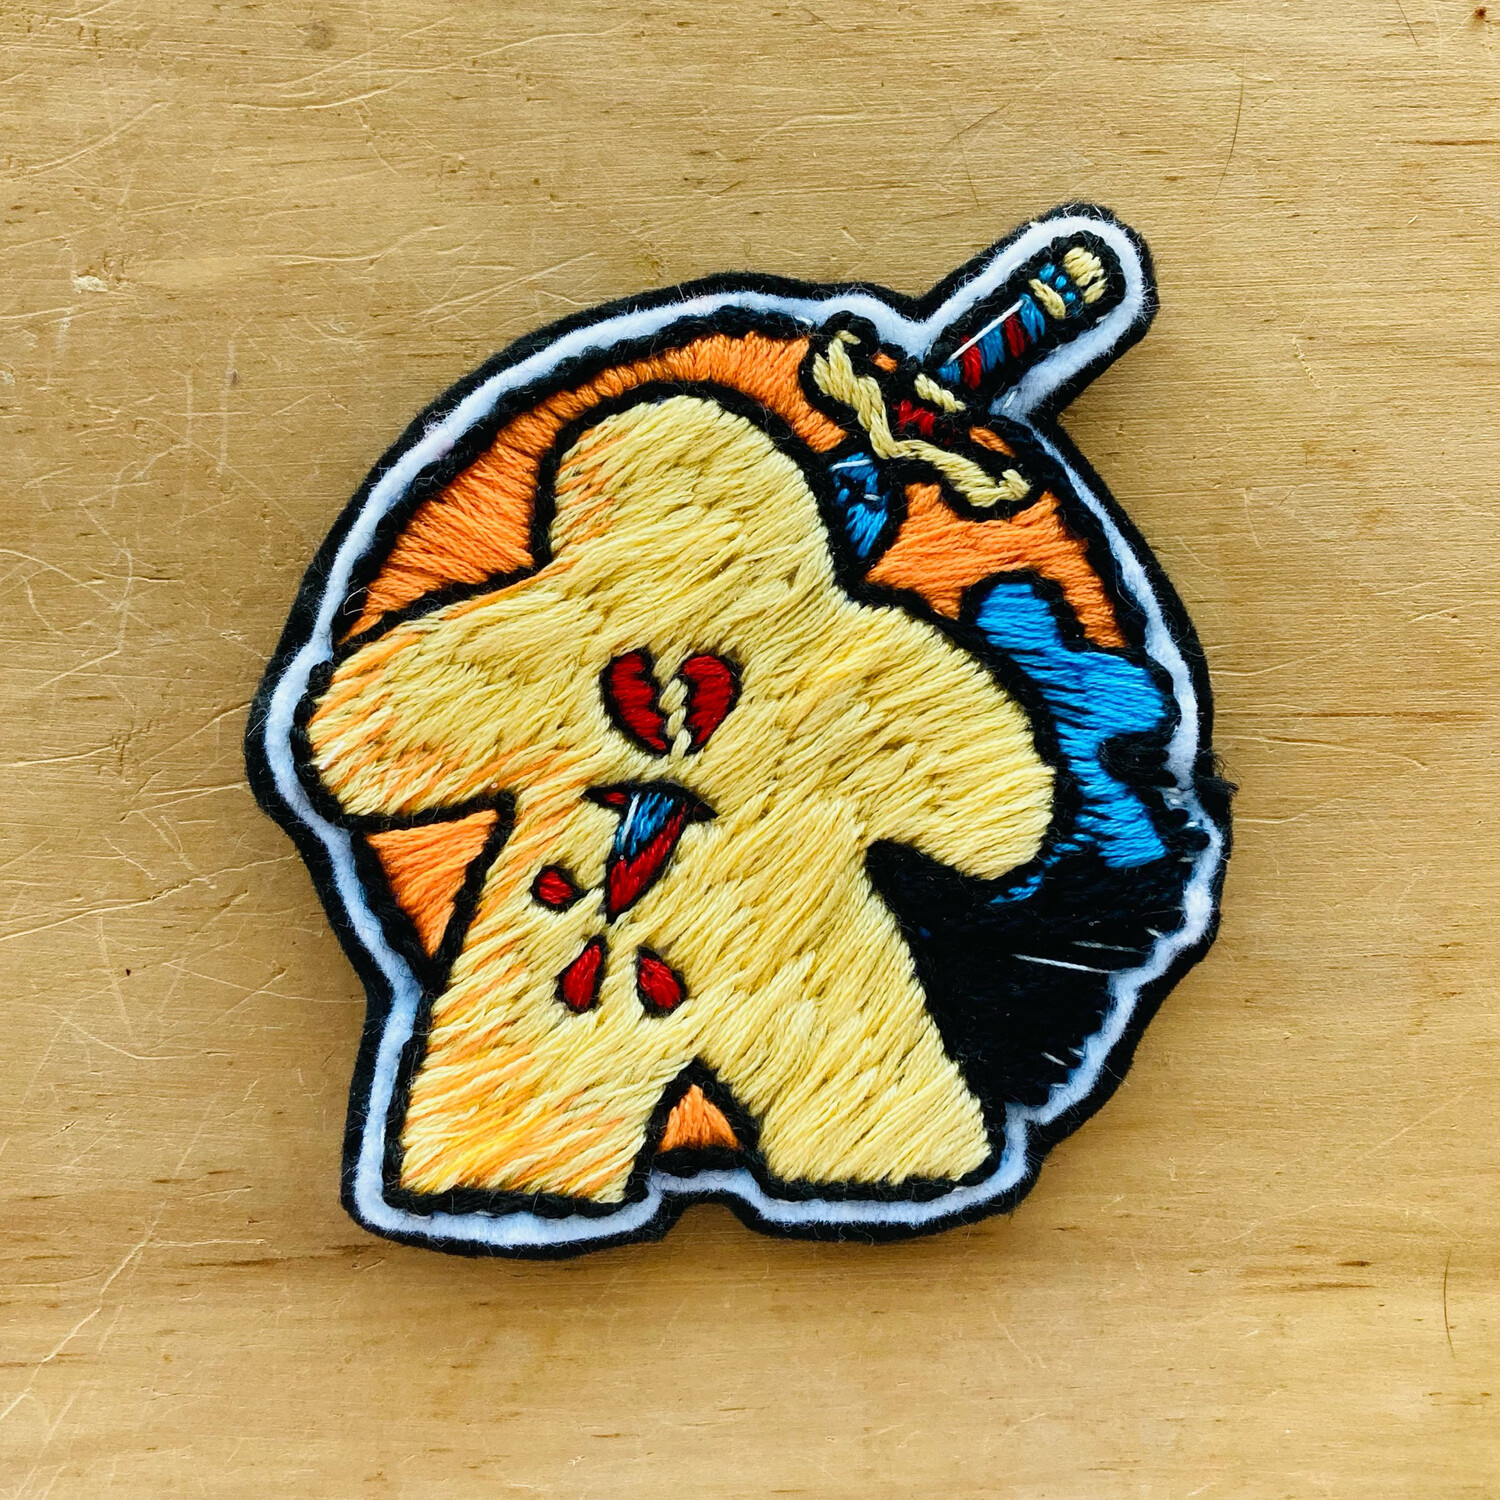 The Traitor Meeple Patch